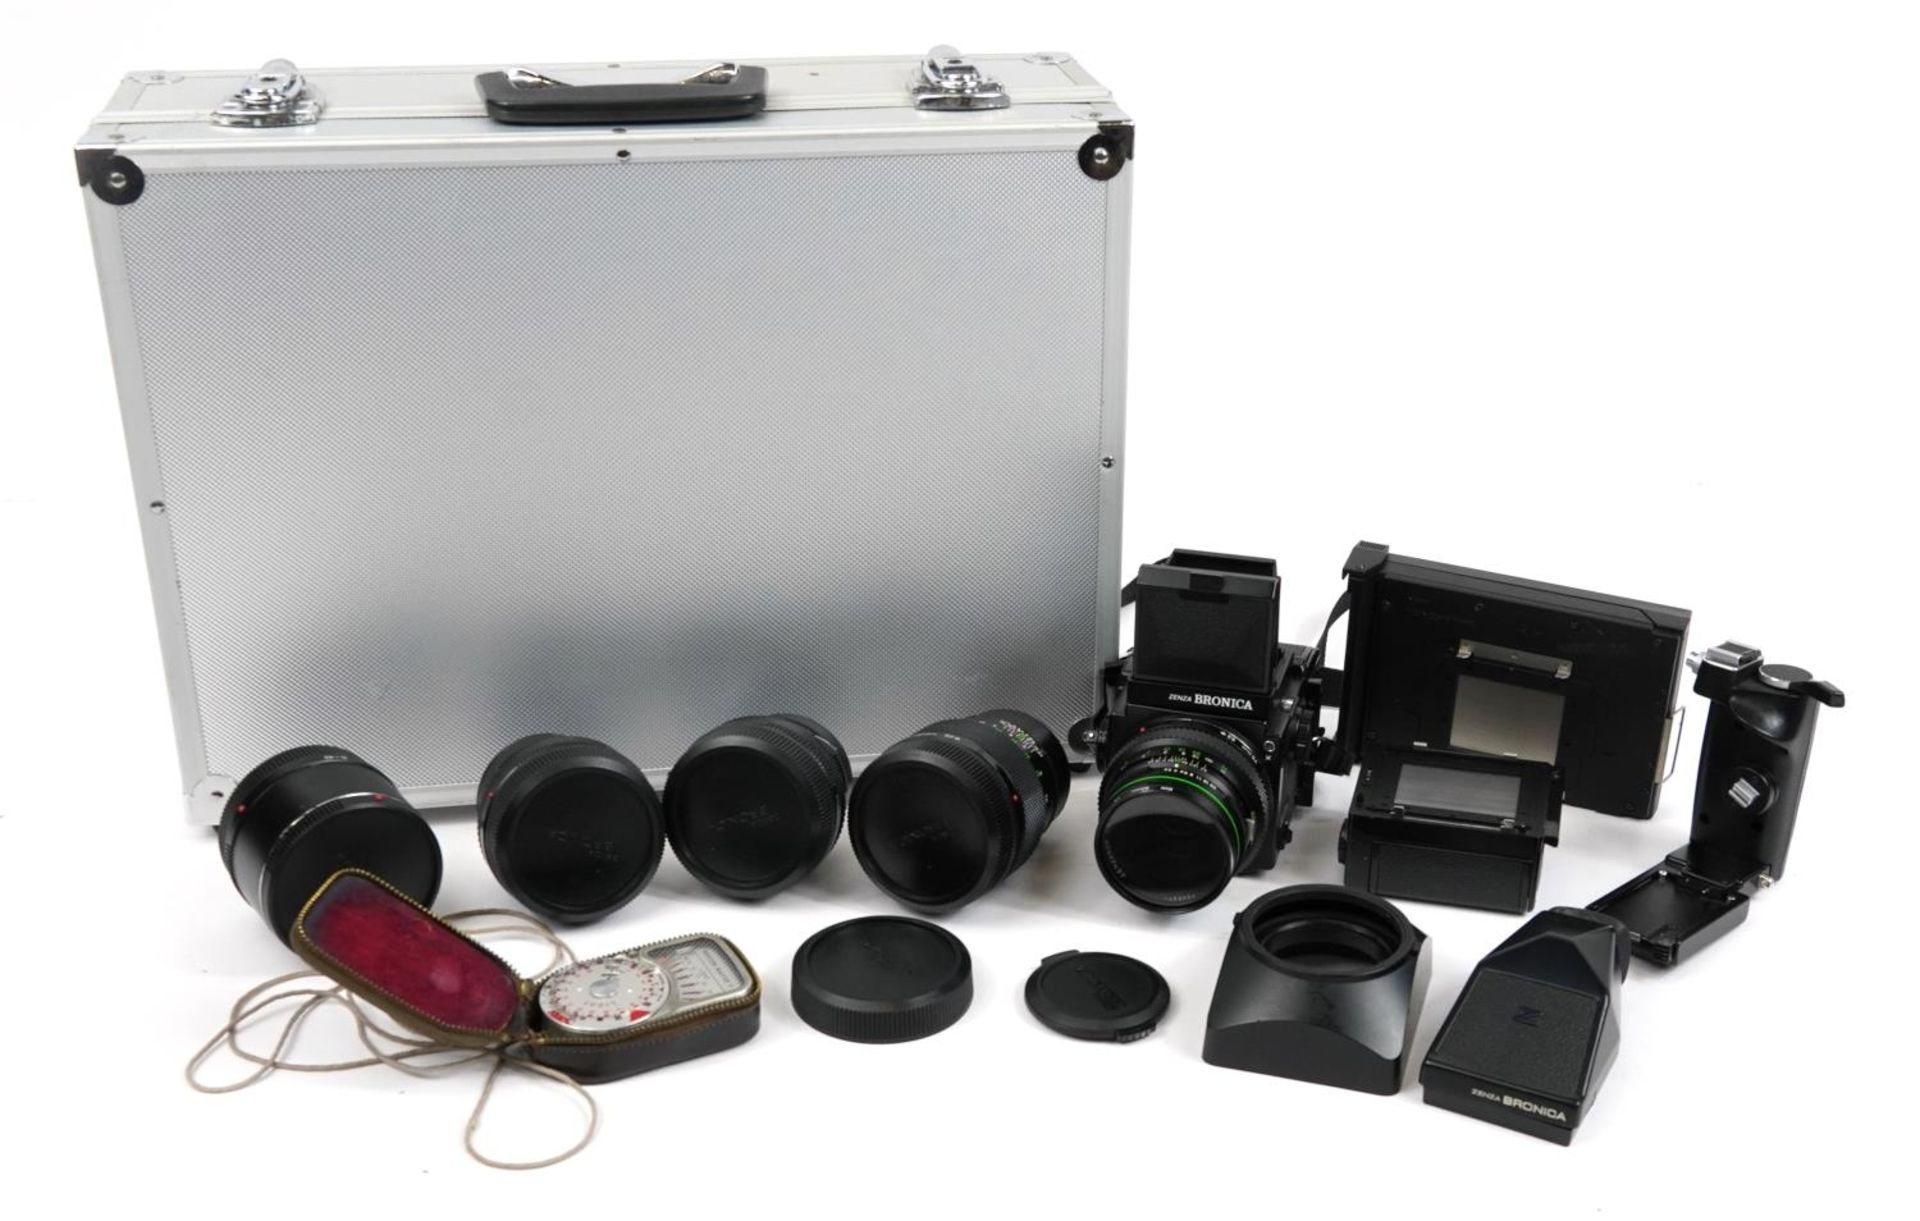 Zenza Bronica Etrs film camera with lenses and accessories housed in a fitted protective case, the